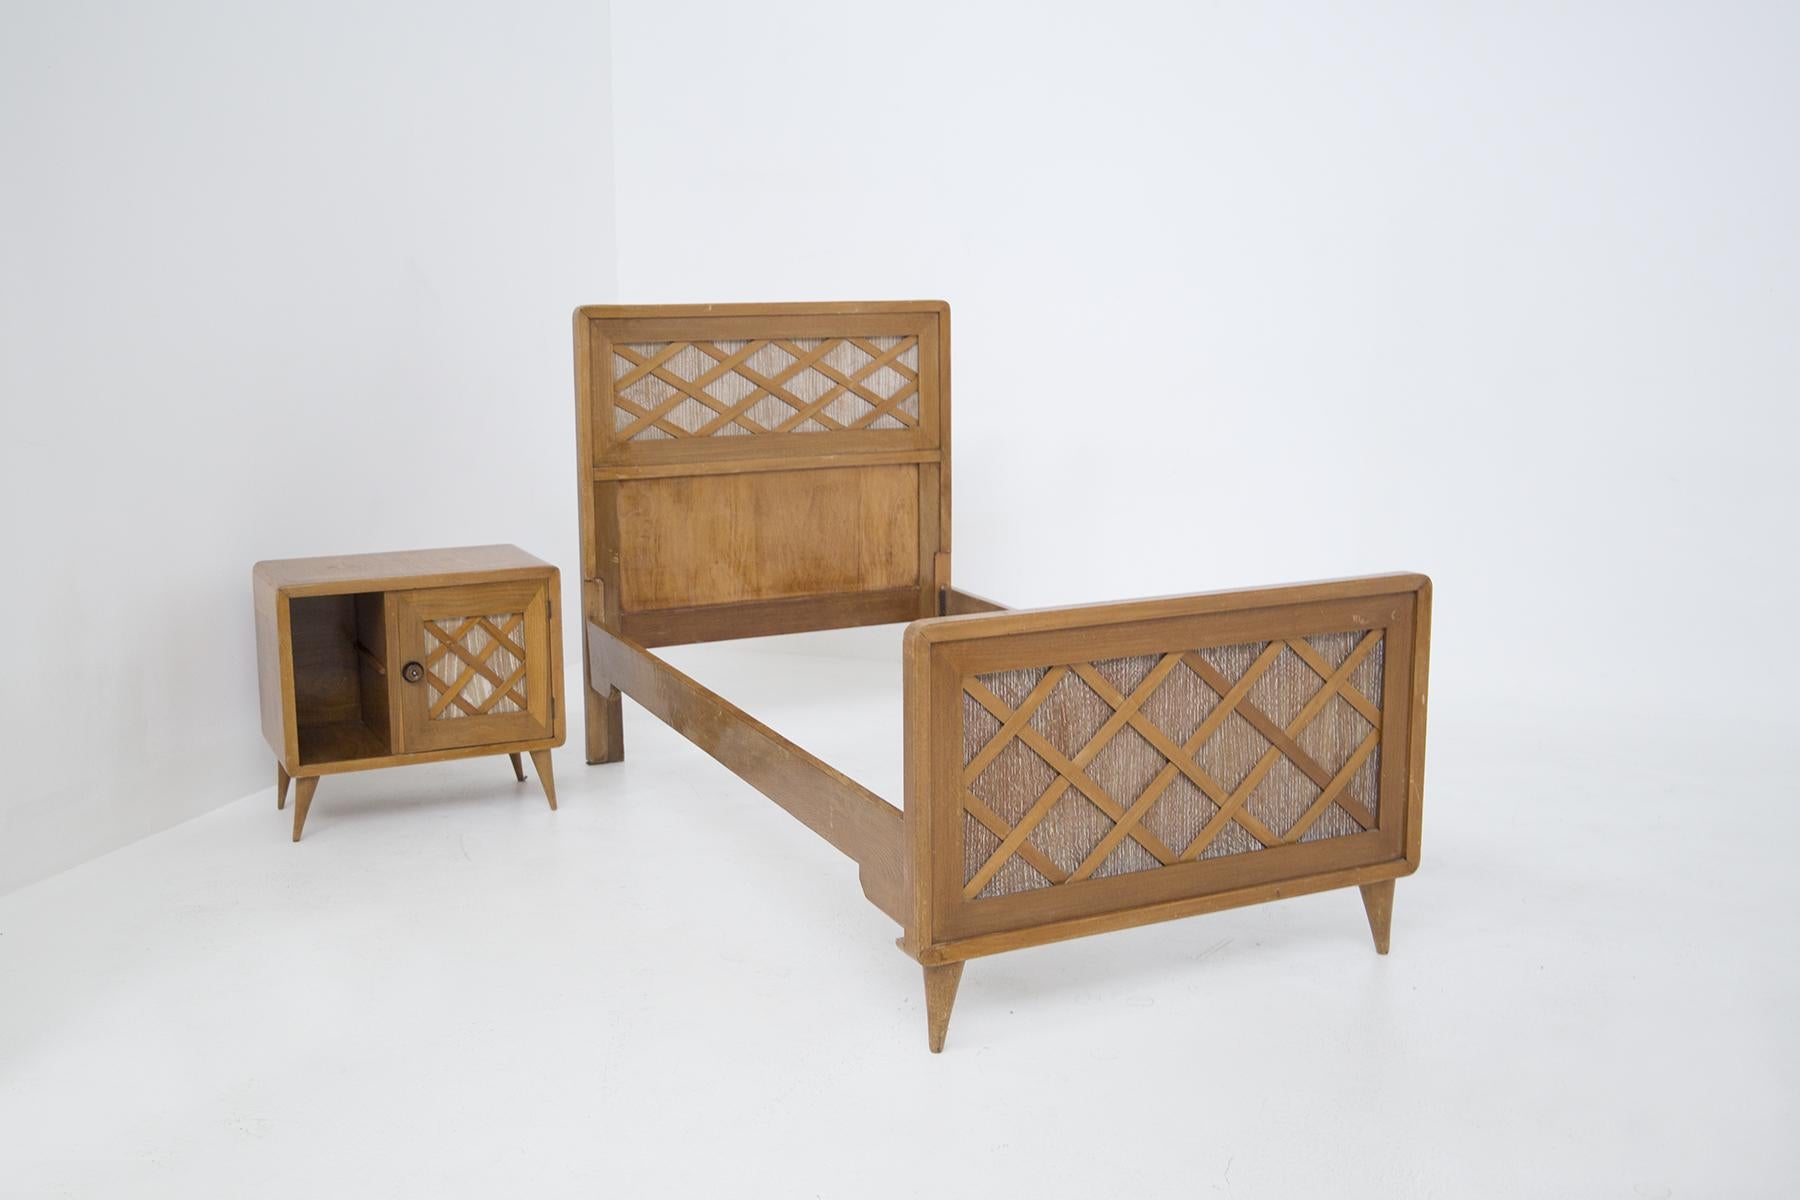 This wooden single bed and bedside table are designed by Paolo Buffa in the 1950s and they are of fine Italian workmanship. The bed has a classic rectangular shape, totally made of wood. There are 4 feet, but the feet under the headboard are